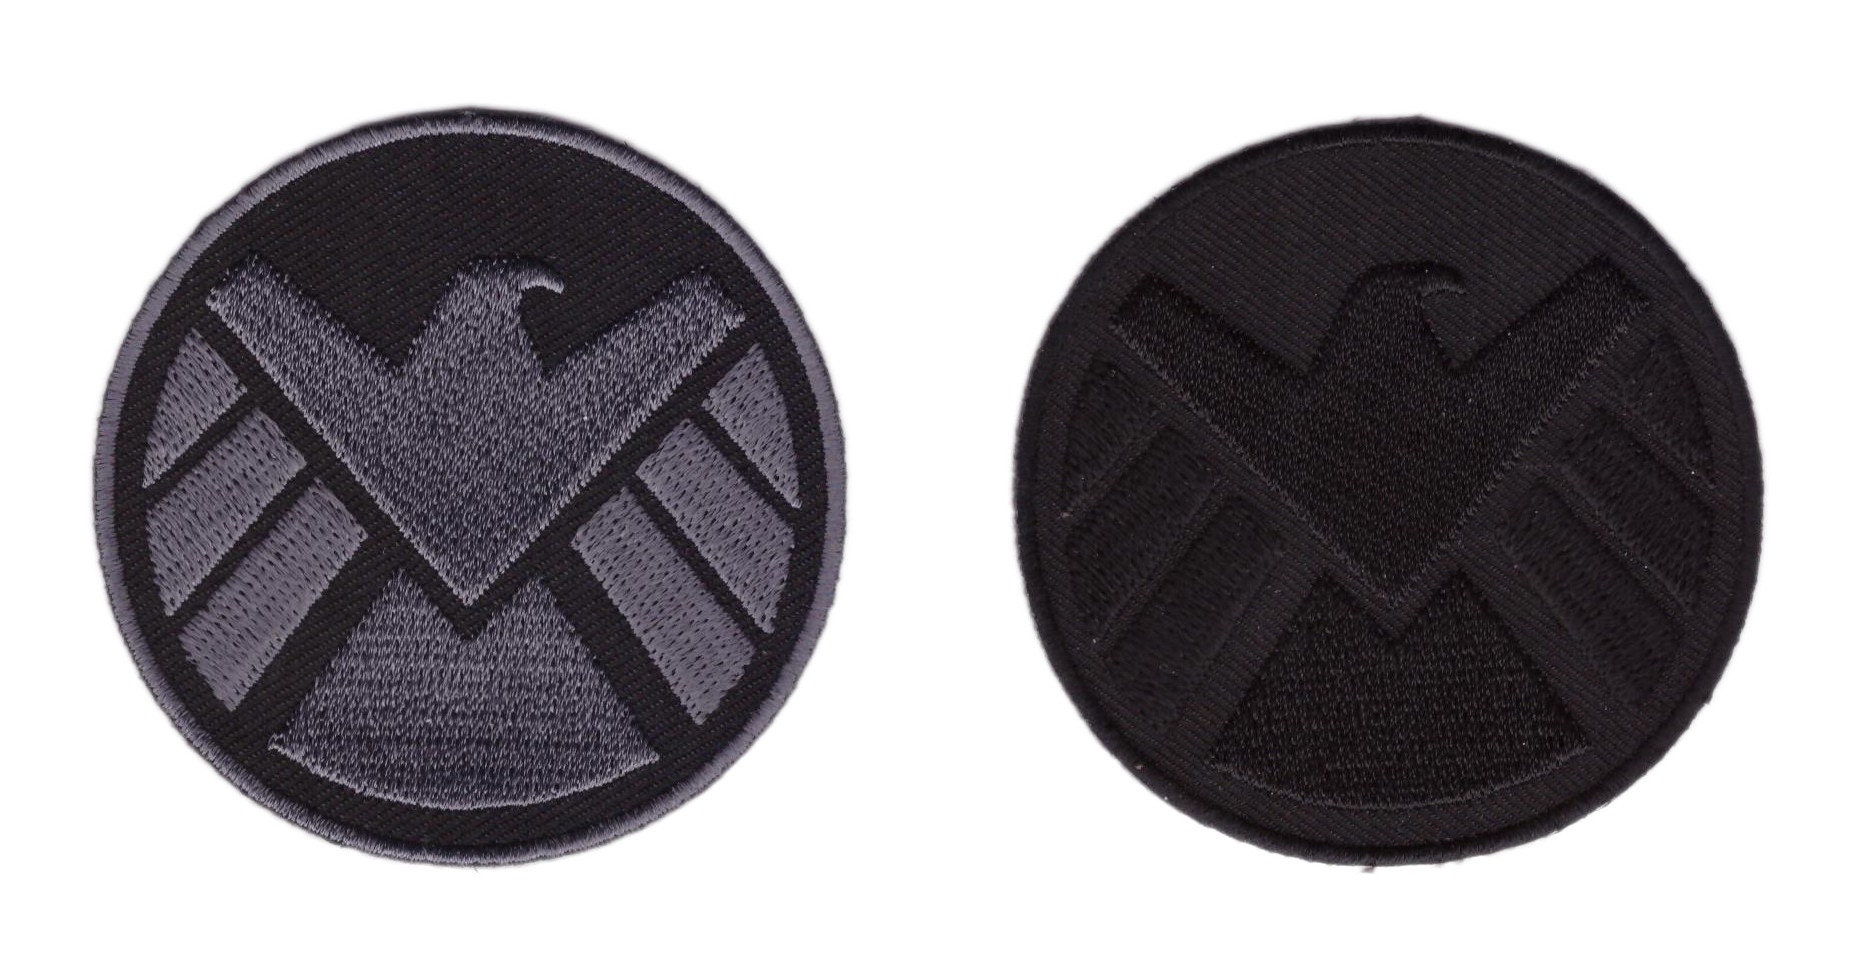 Agents of Shield Costume/Cosplay Green & Black Patch embroidered Set 3 inches 